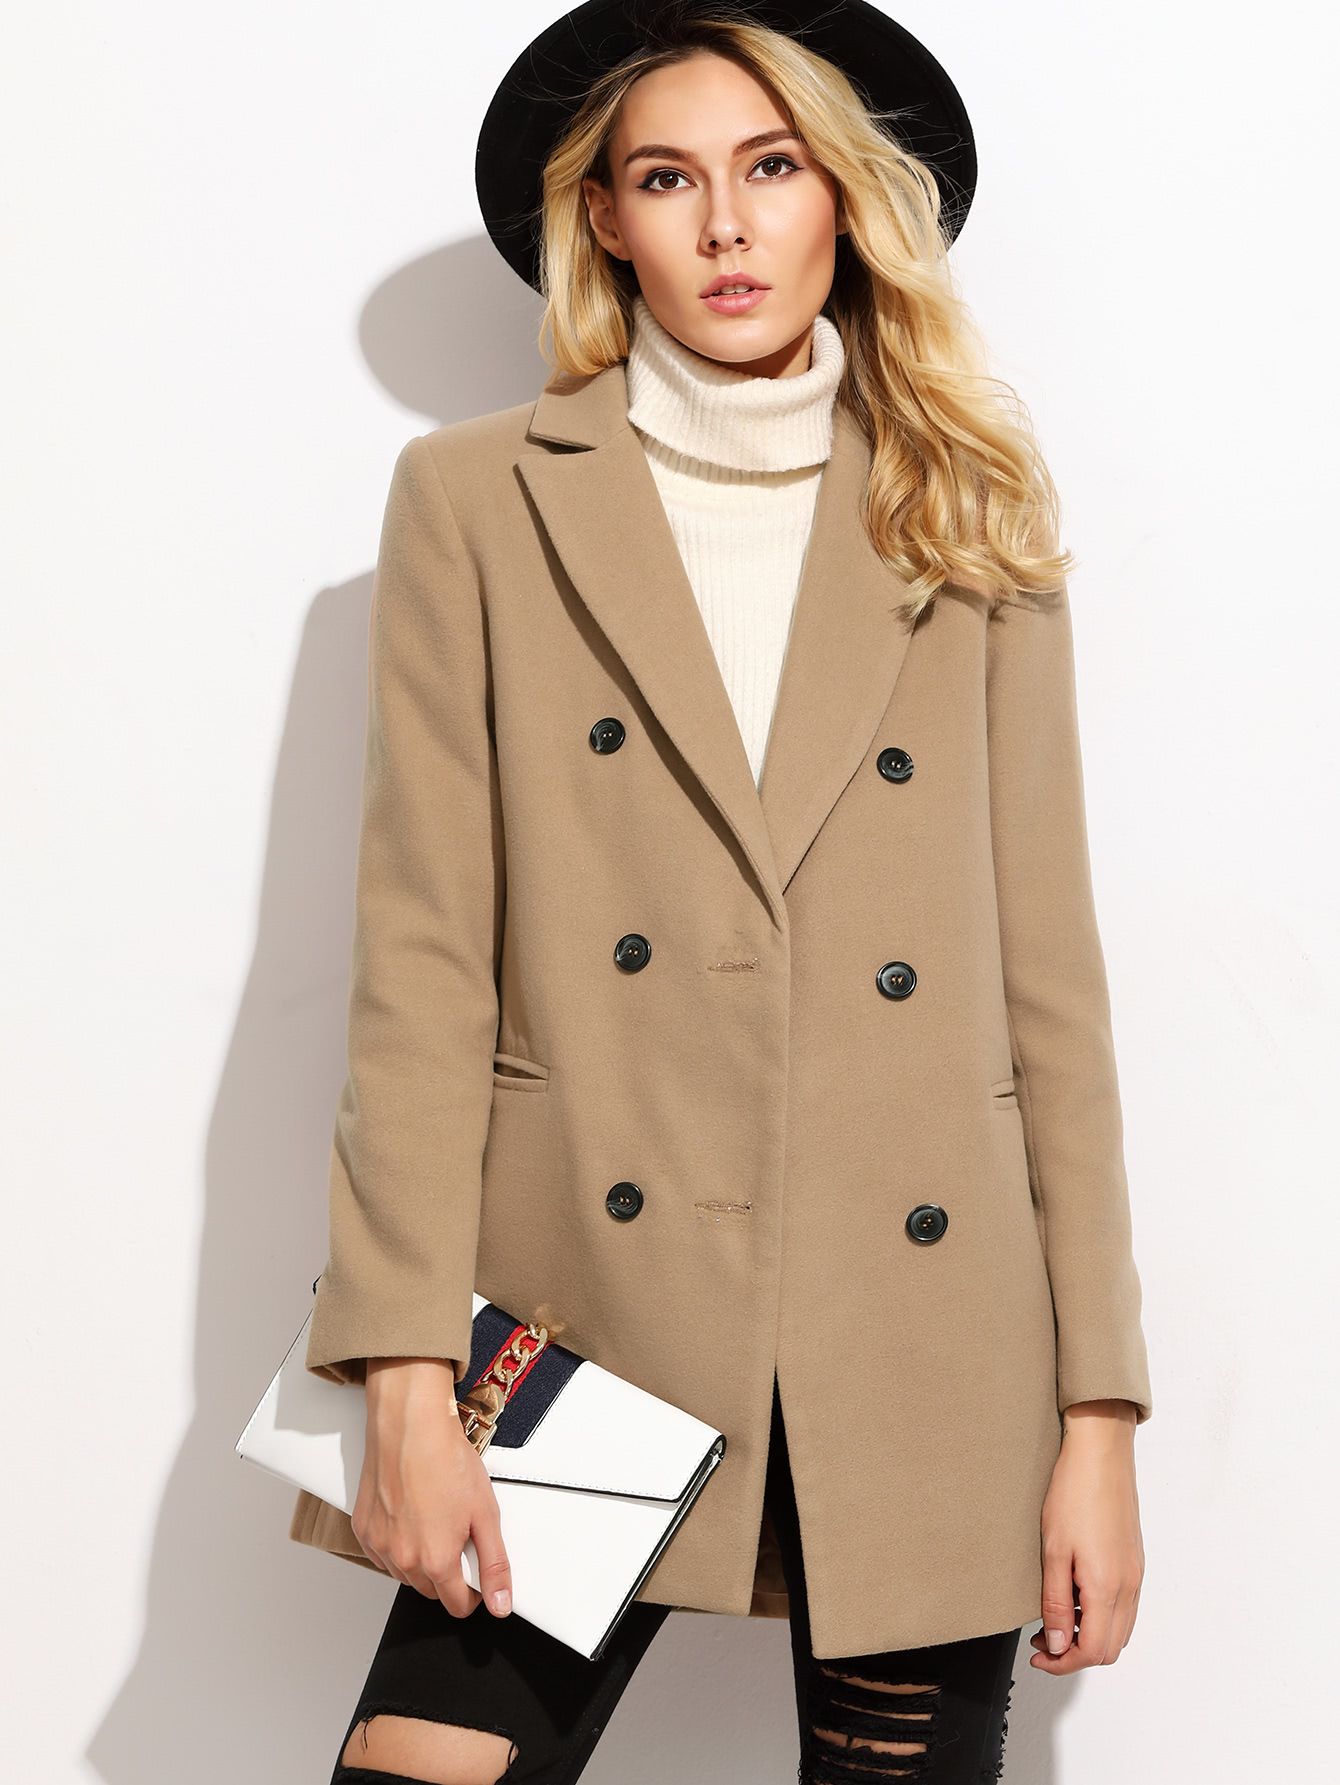 SHEIN Camel Double Breasted Coat With Welt Pocket | SHEIN